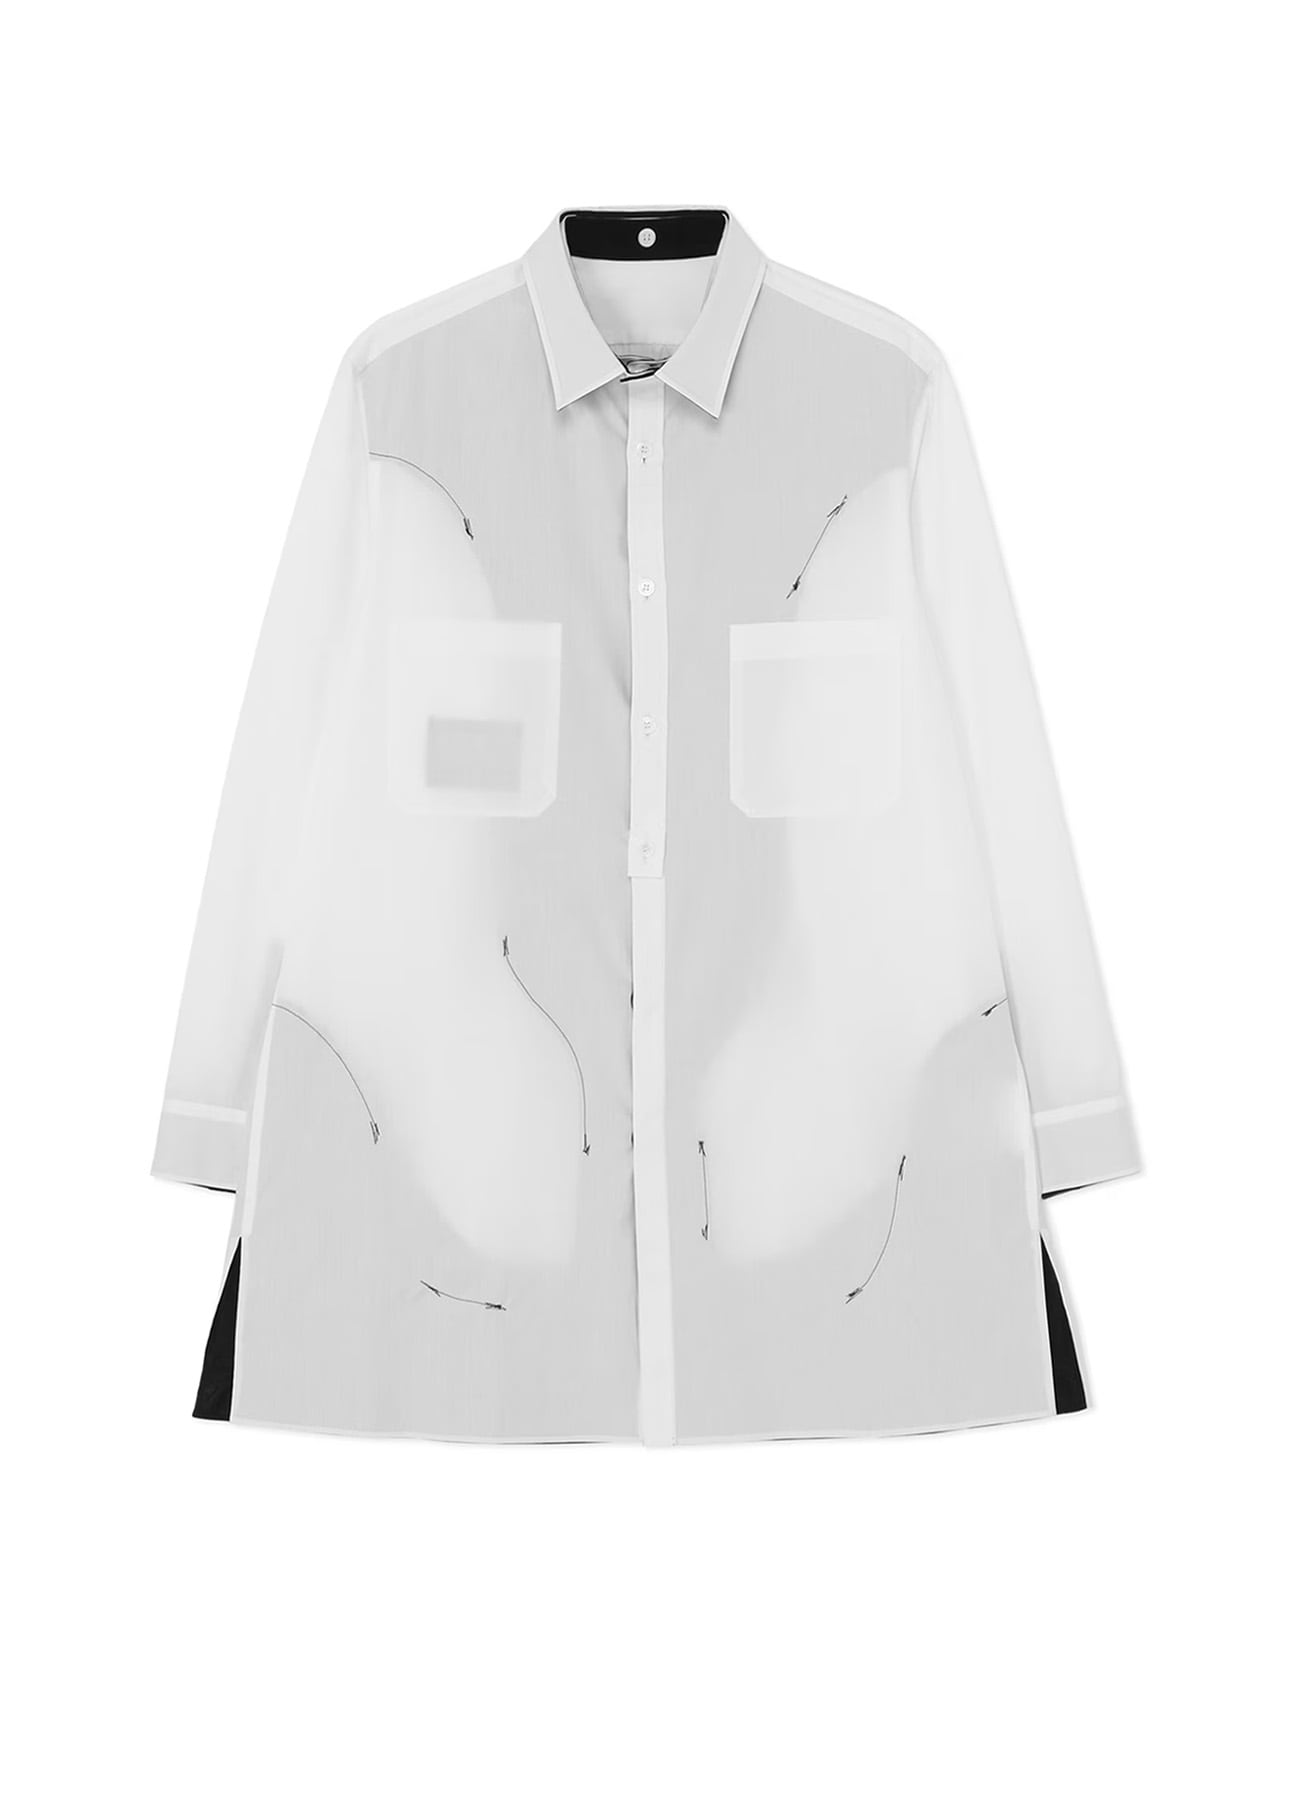 BLACK AND WHITE SHIRT WITH DECONSTRUCTED COLLAR